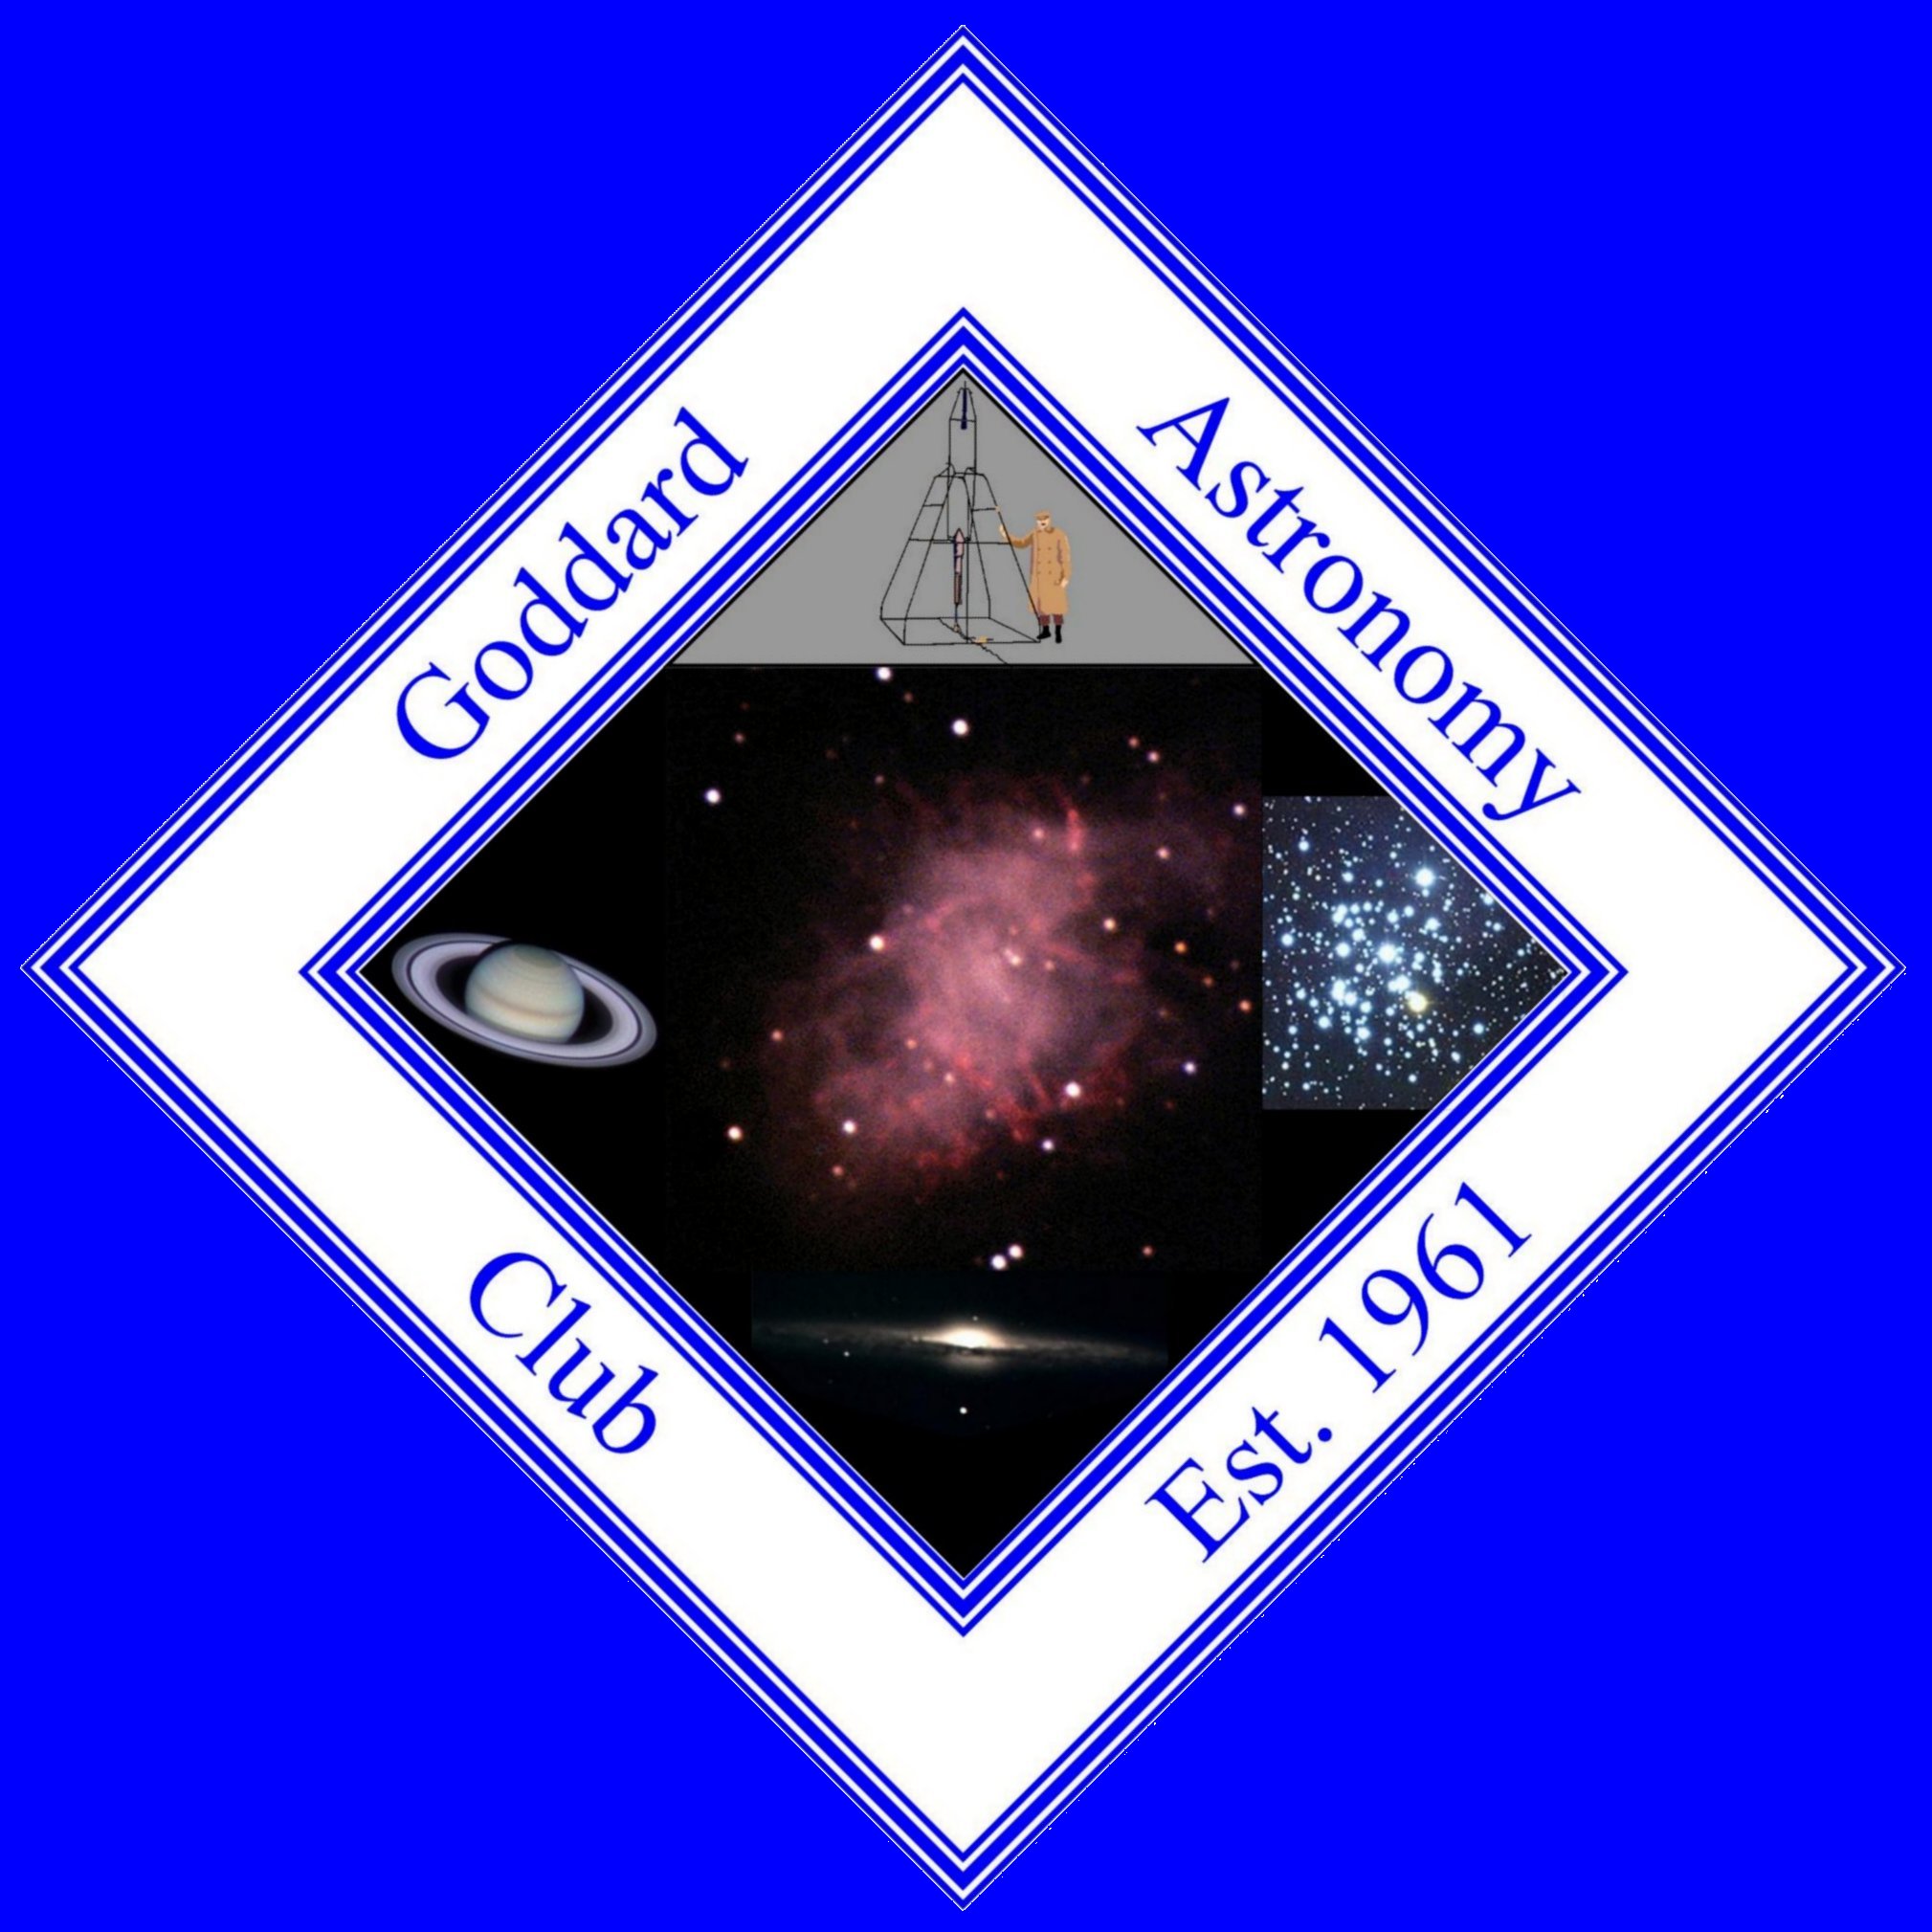 Goddard Astronomy Club logo showing the Crab nebula in the center, with a picture of Robert Goddard and his first rocket above, to the left a telescopic view of Saturn, to the right an open cluster and below, an edge on view of a spiral galaxy.